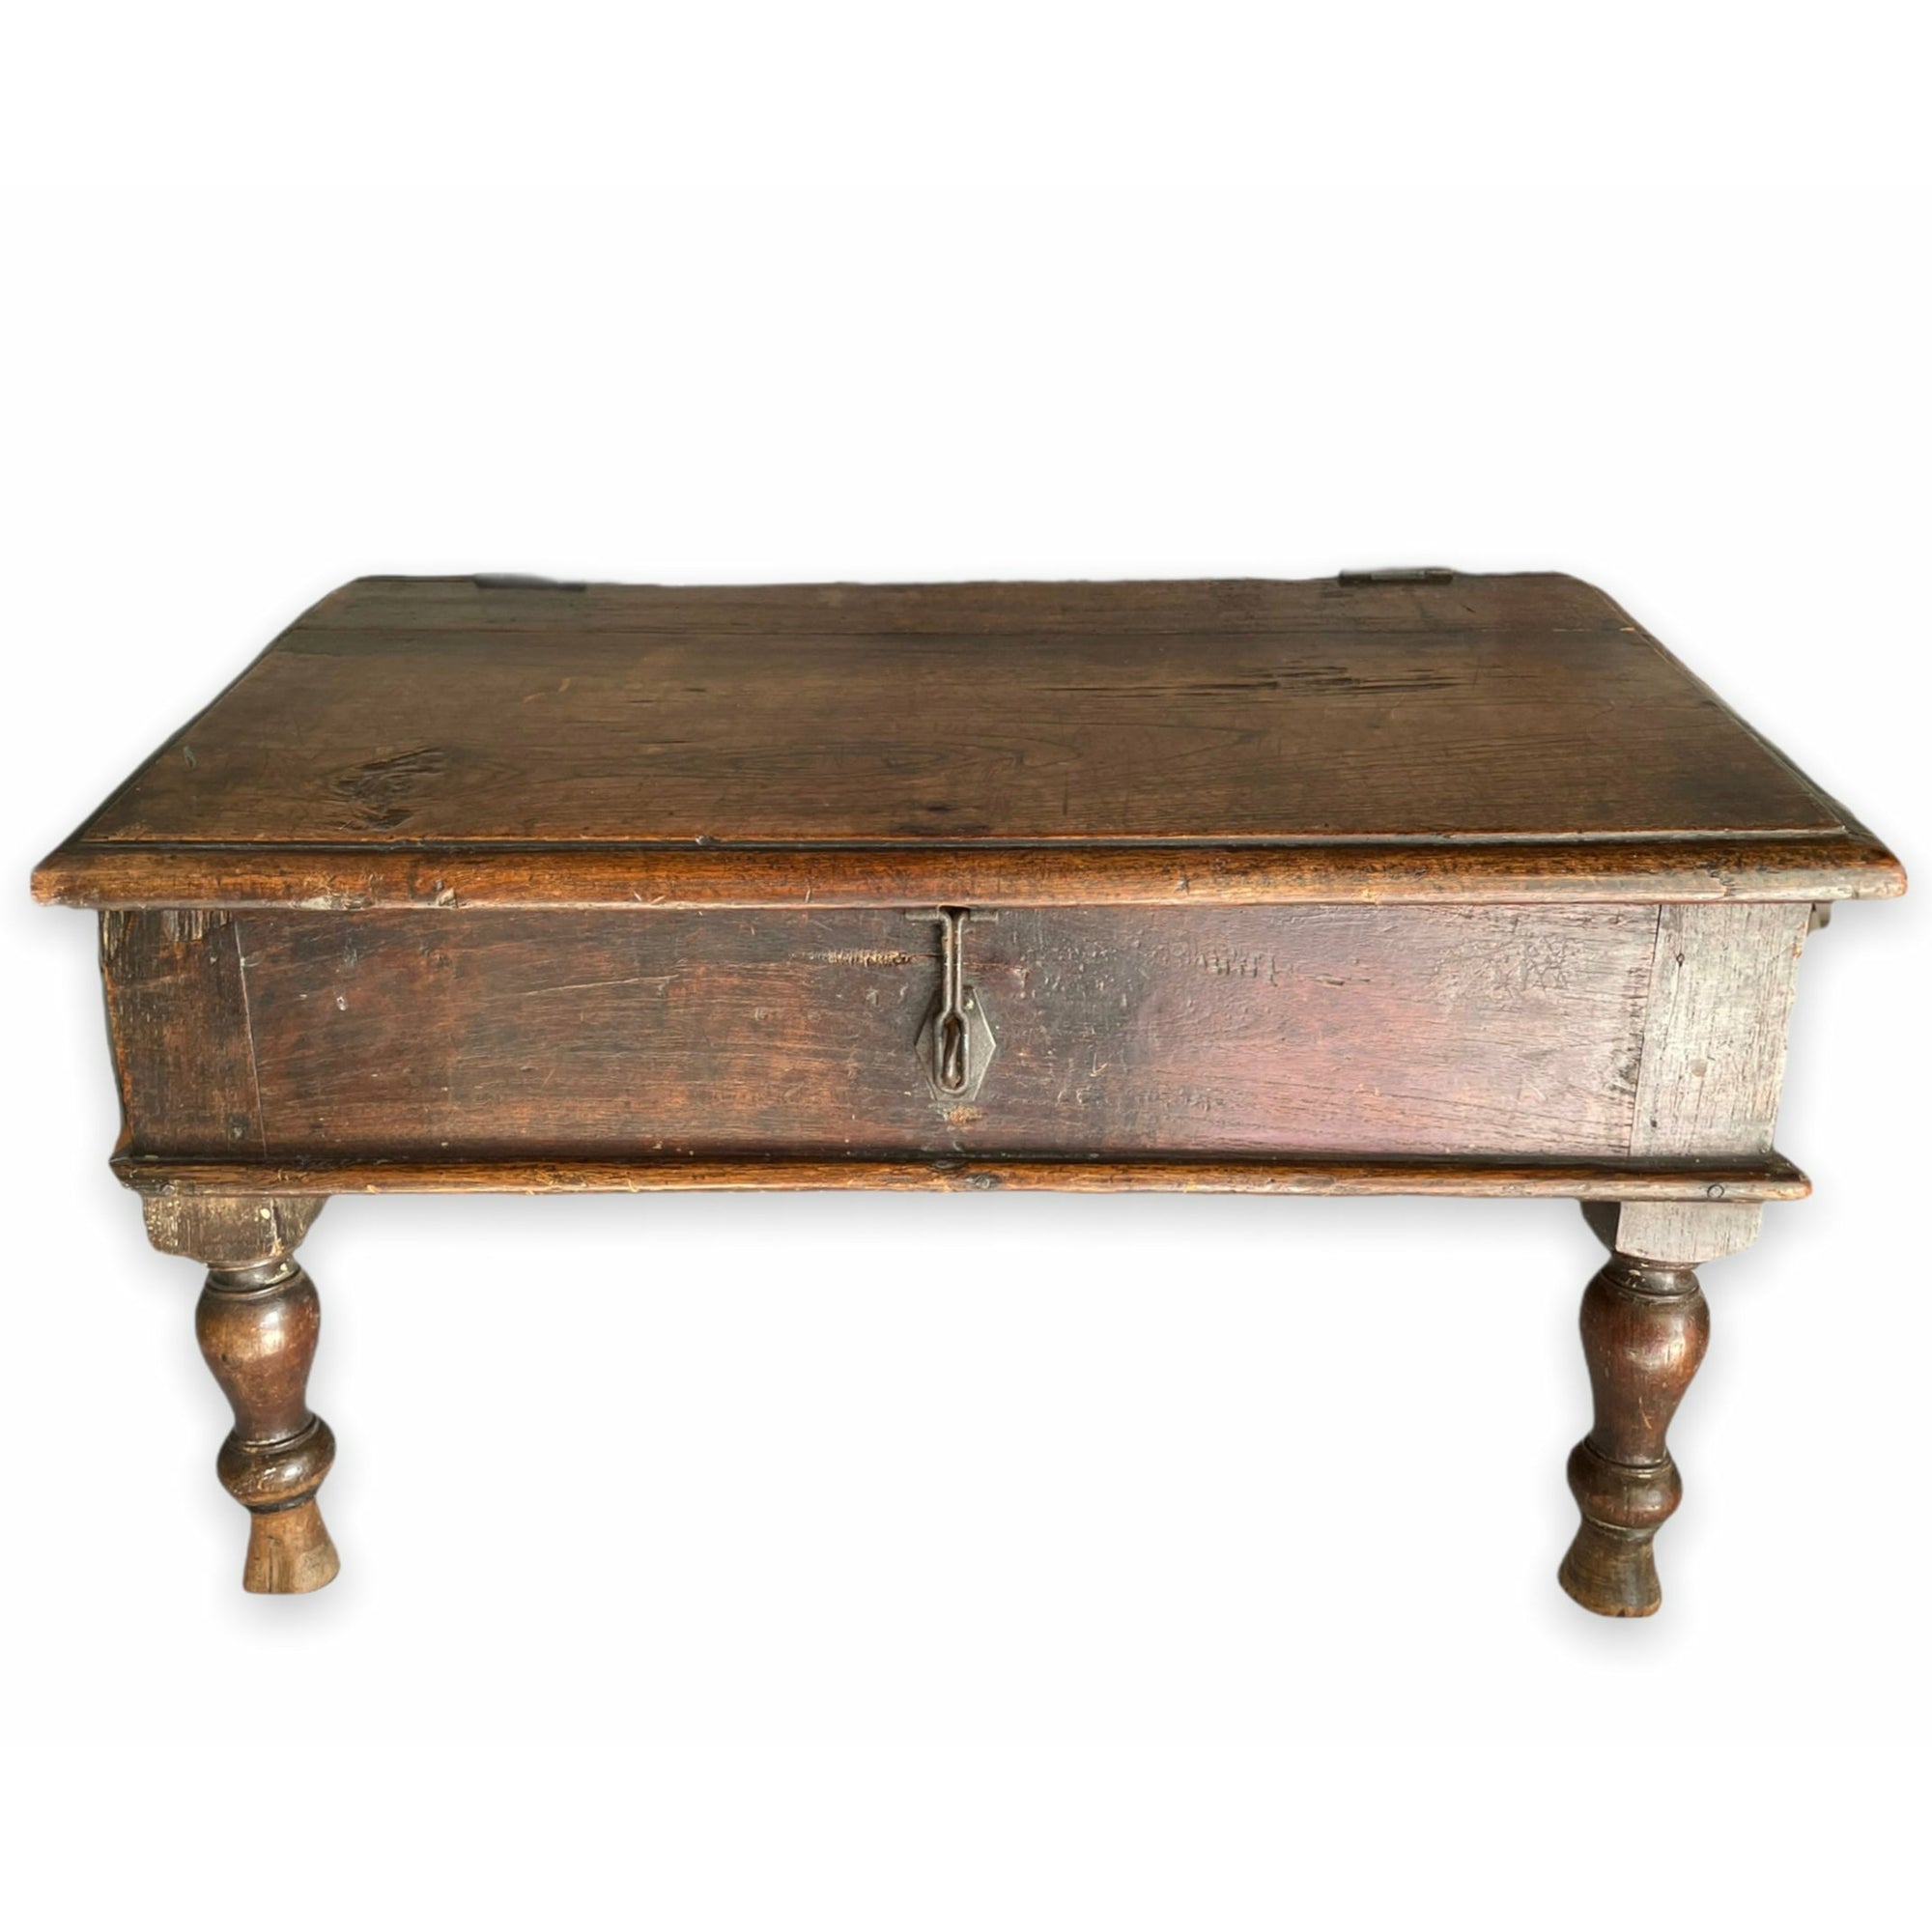 Vintage Portable Writing Desk - The Cultivated Avenue